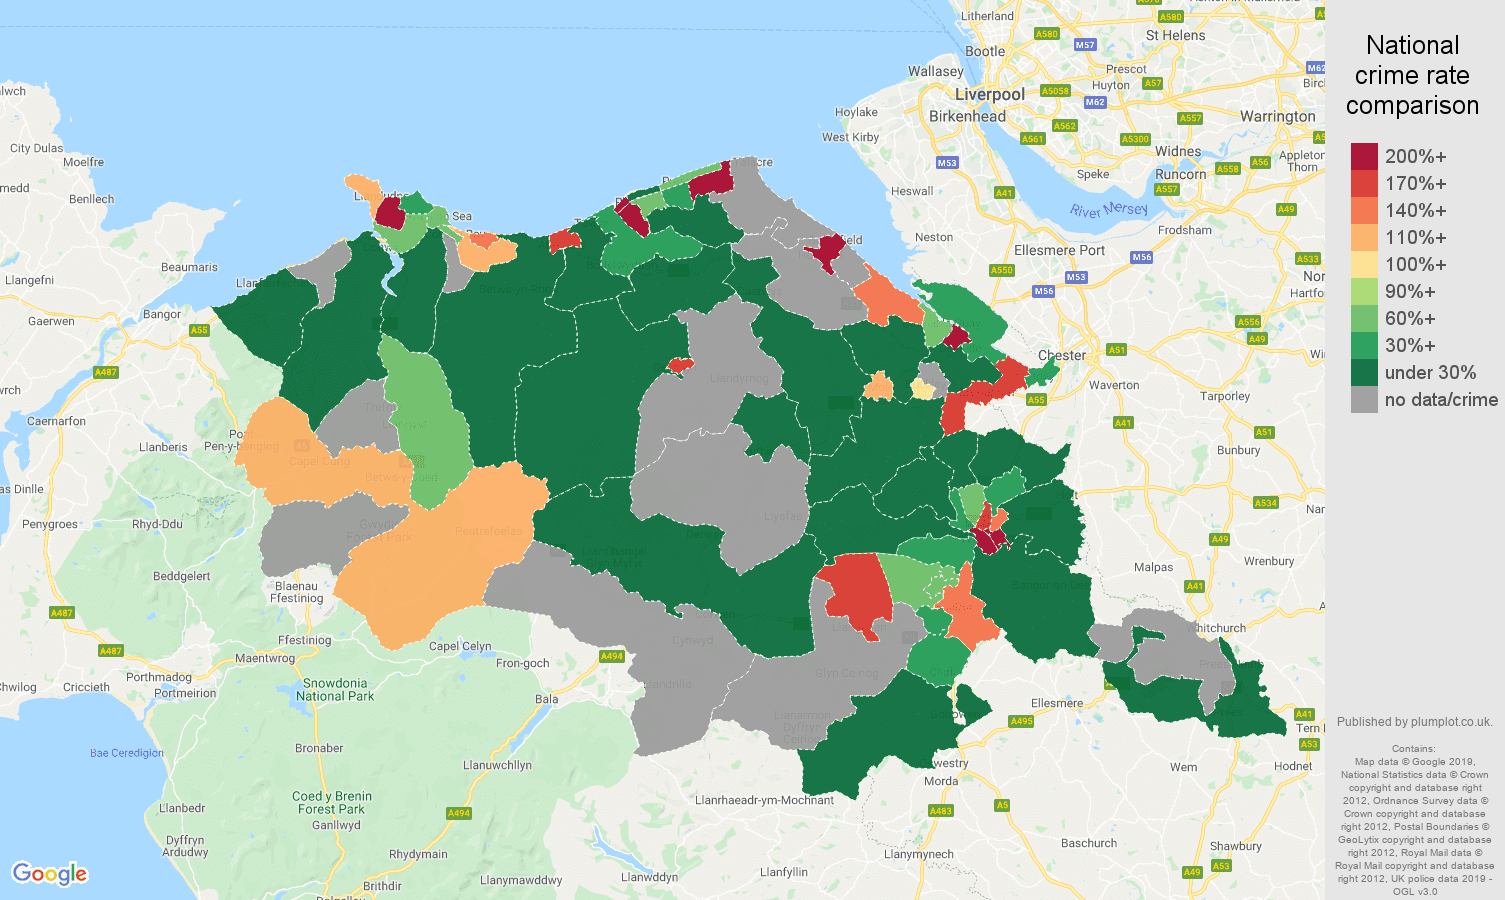 Clwyd shoplifting crime rate comparison map